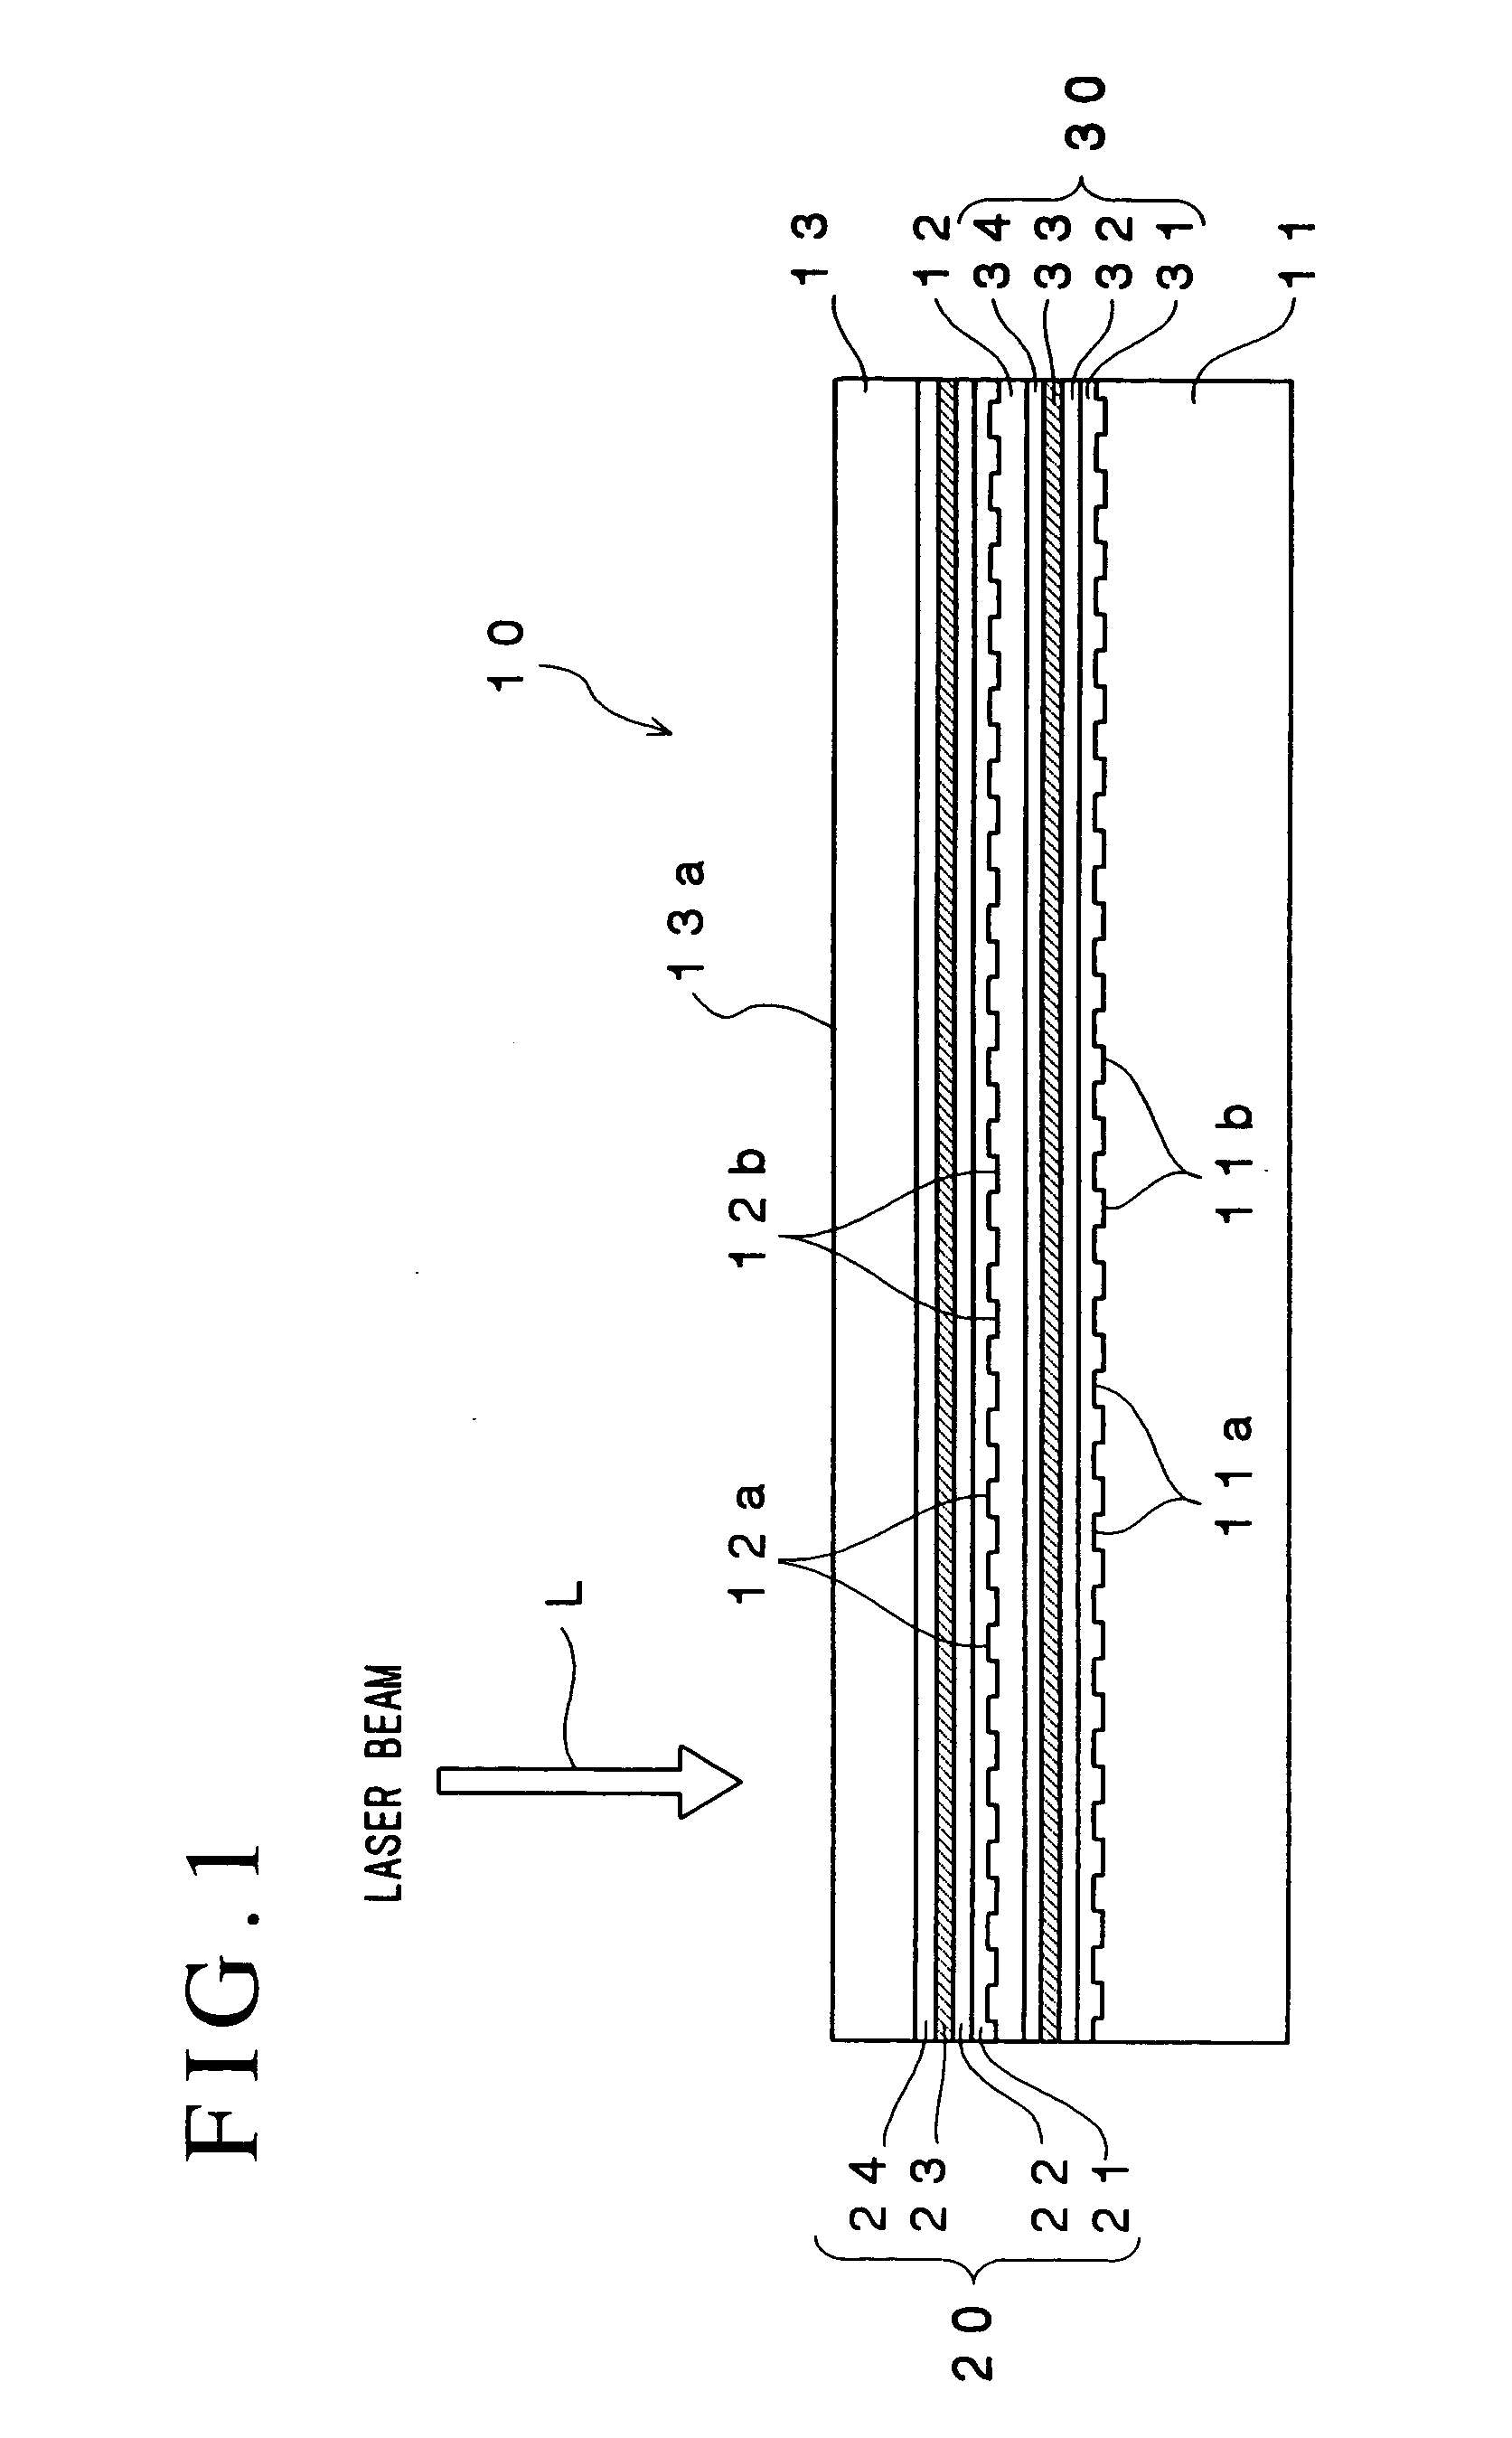 Optical recording medium and method for recording and reproducing data